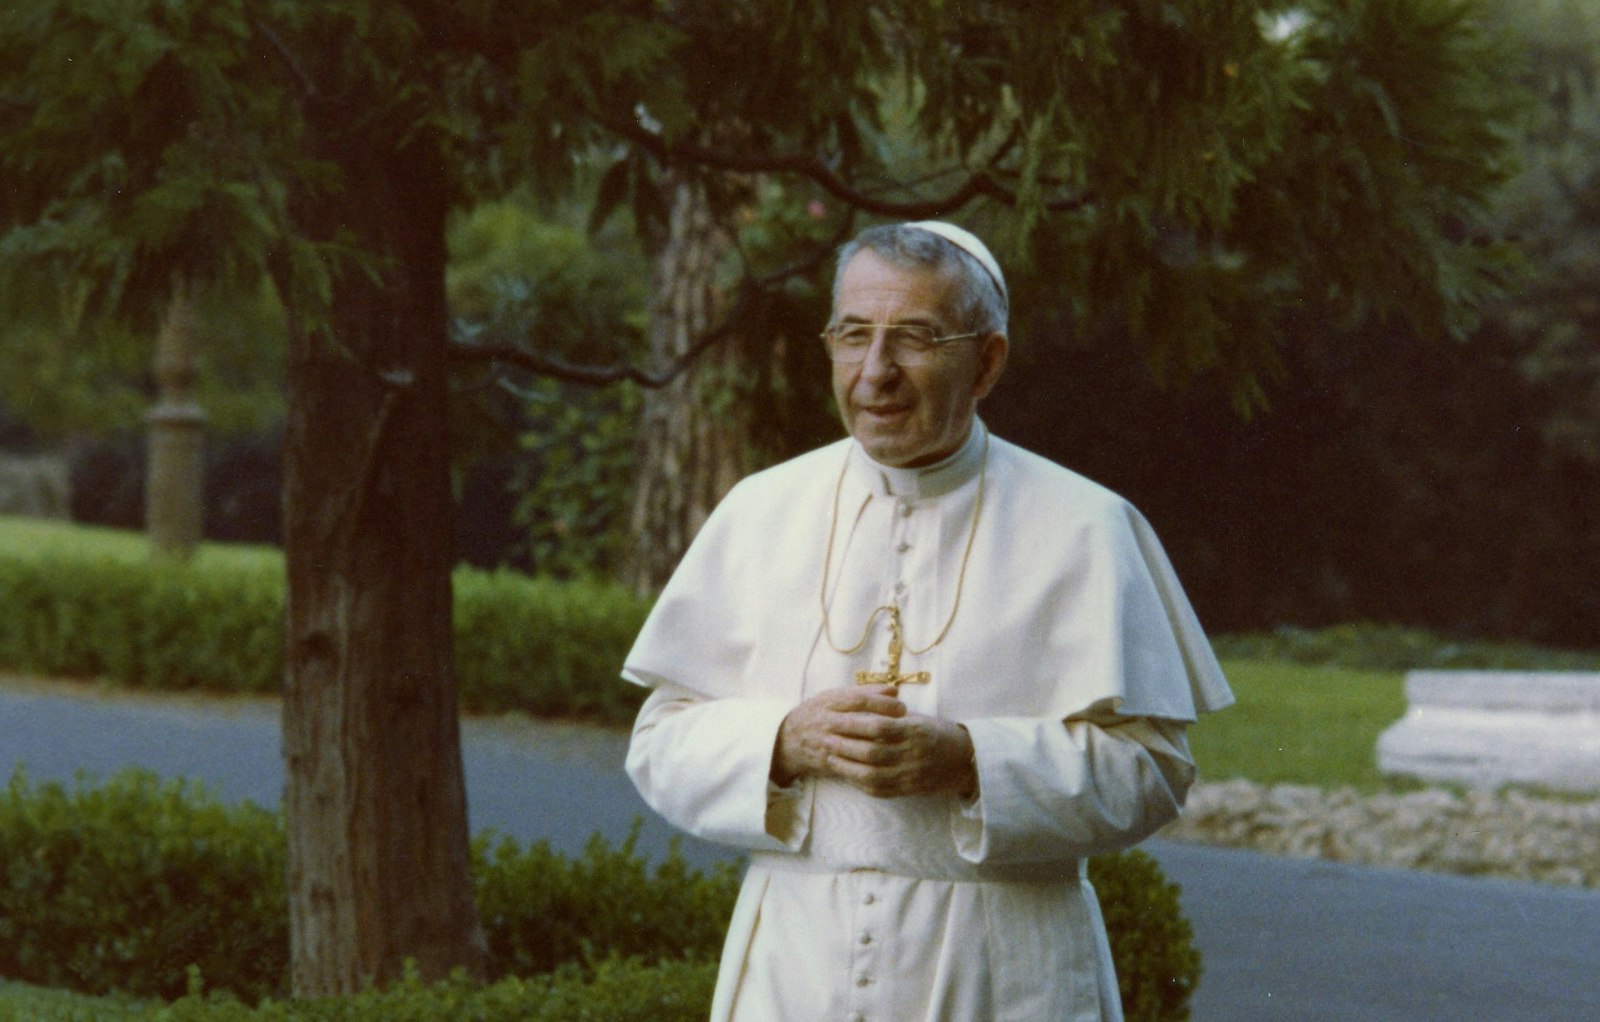 Pope John Paul I walks at the Vatican in 1978. The editorial director of Vatican News, Andrea Tornielli, wrote in a June 21 article that Archbishop Albino Luciani, the future Pope John Paul I, had hoped that Pope Paul VI would liberalize church teaching on artificial birth control, but when he didn't, the archbishop helped promote acceptance of "Humanae Vitae." (CNS file photo/L'Osservatore Romano)